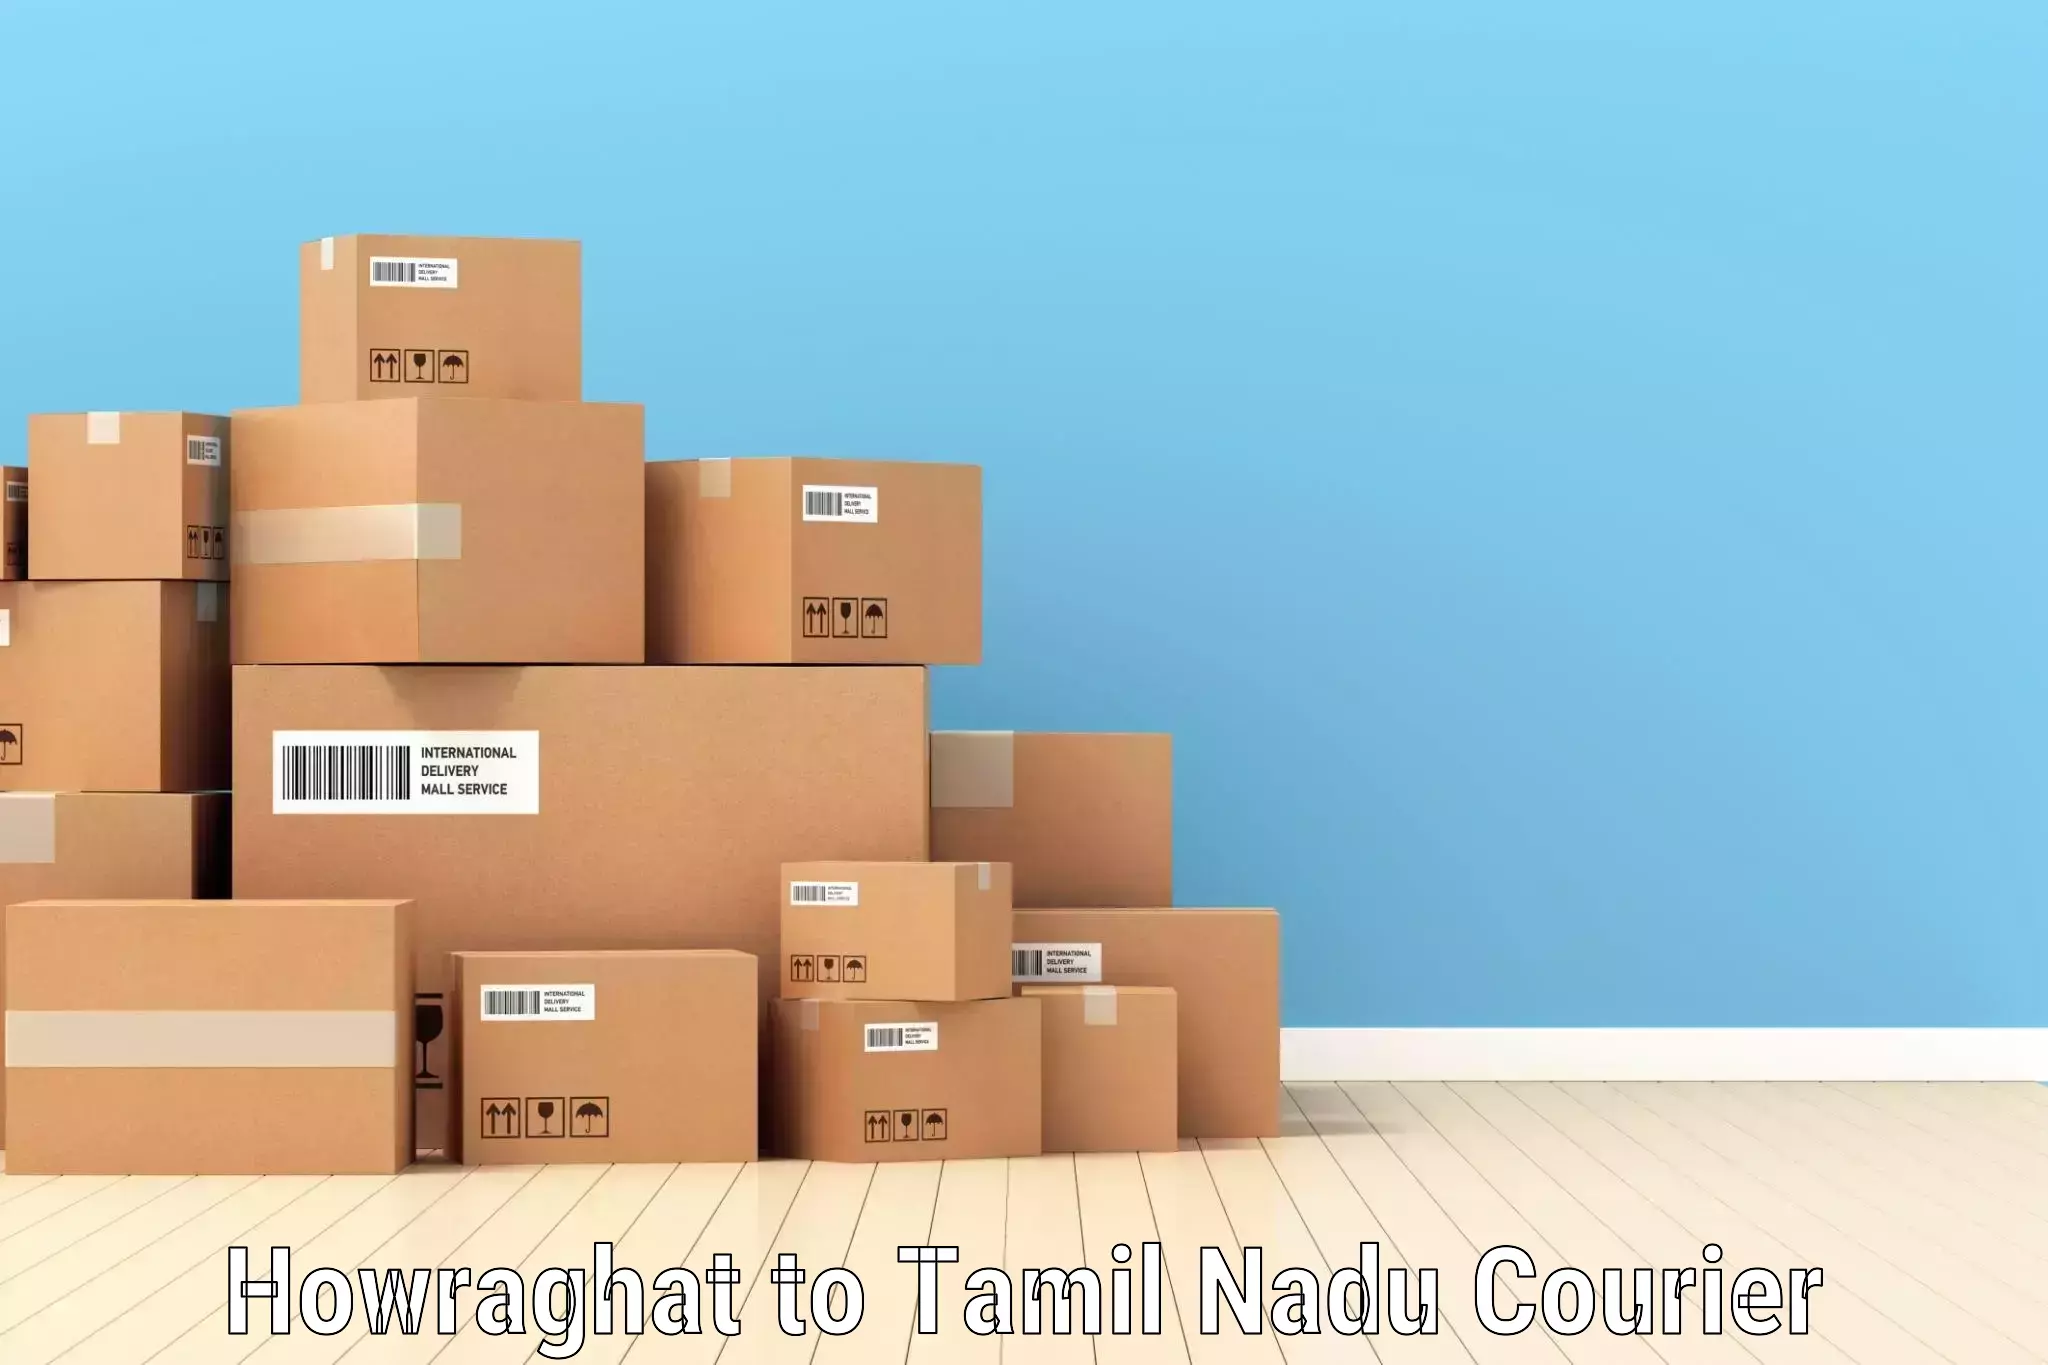 Nationwide parcel services in Howraghat to Tuticorin Port